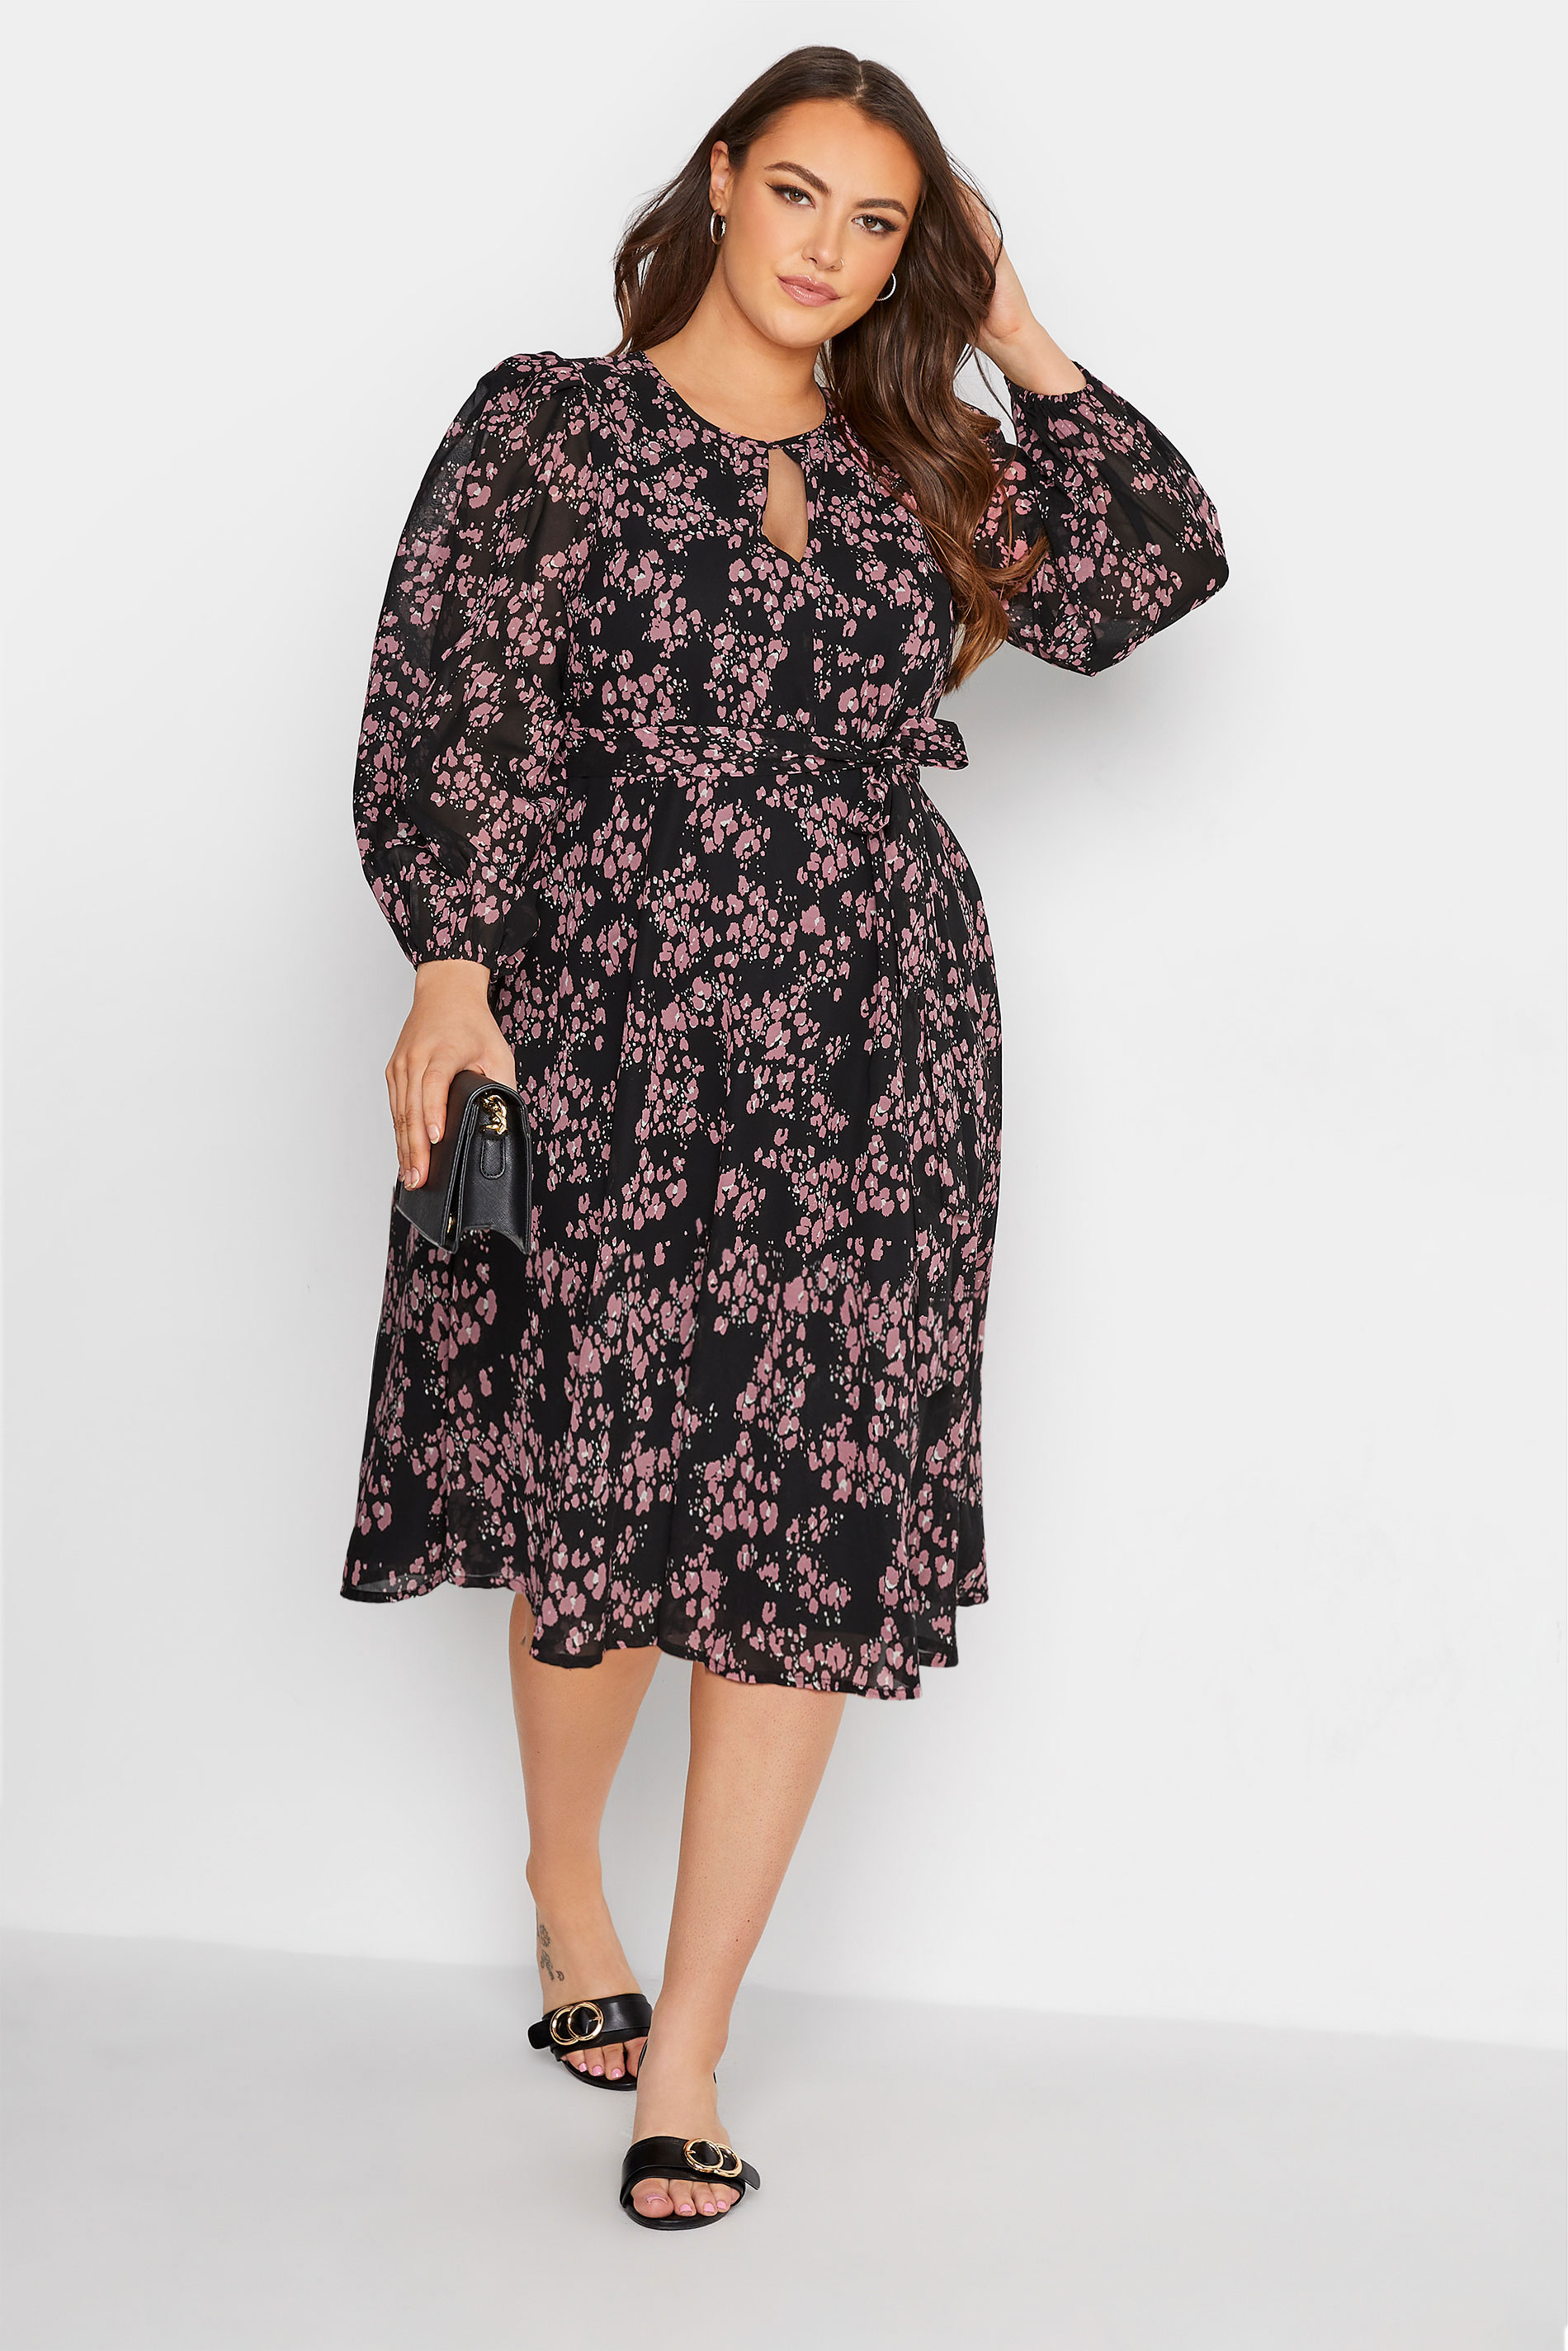 Robes Grande Taille Grande taille  Robes Patineuses | YOURS LONDON - Robe Noire & Rose Animal Manches Ballons - BS77867